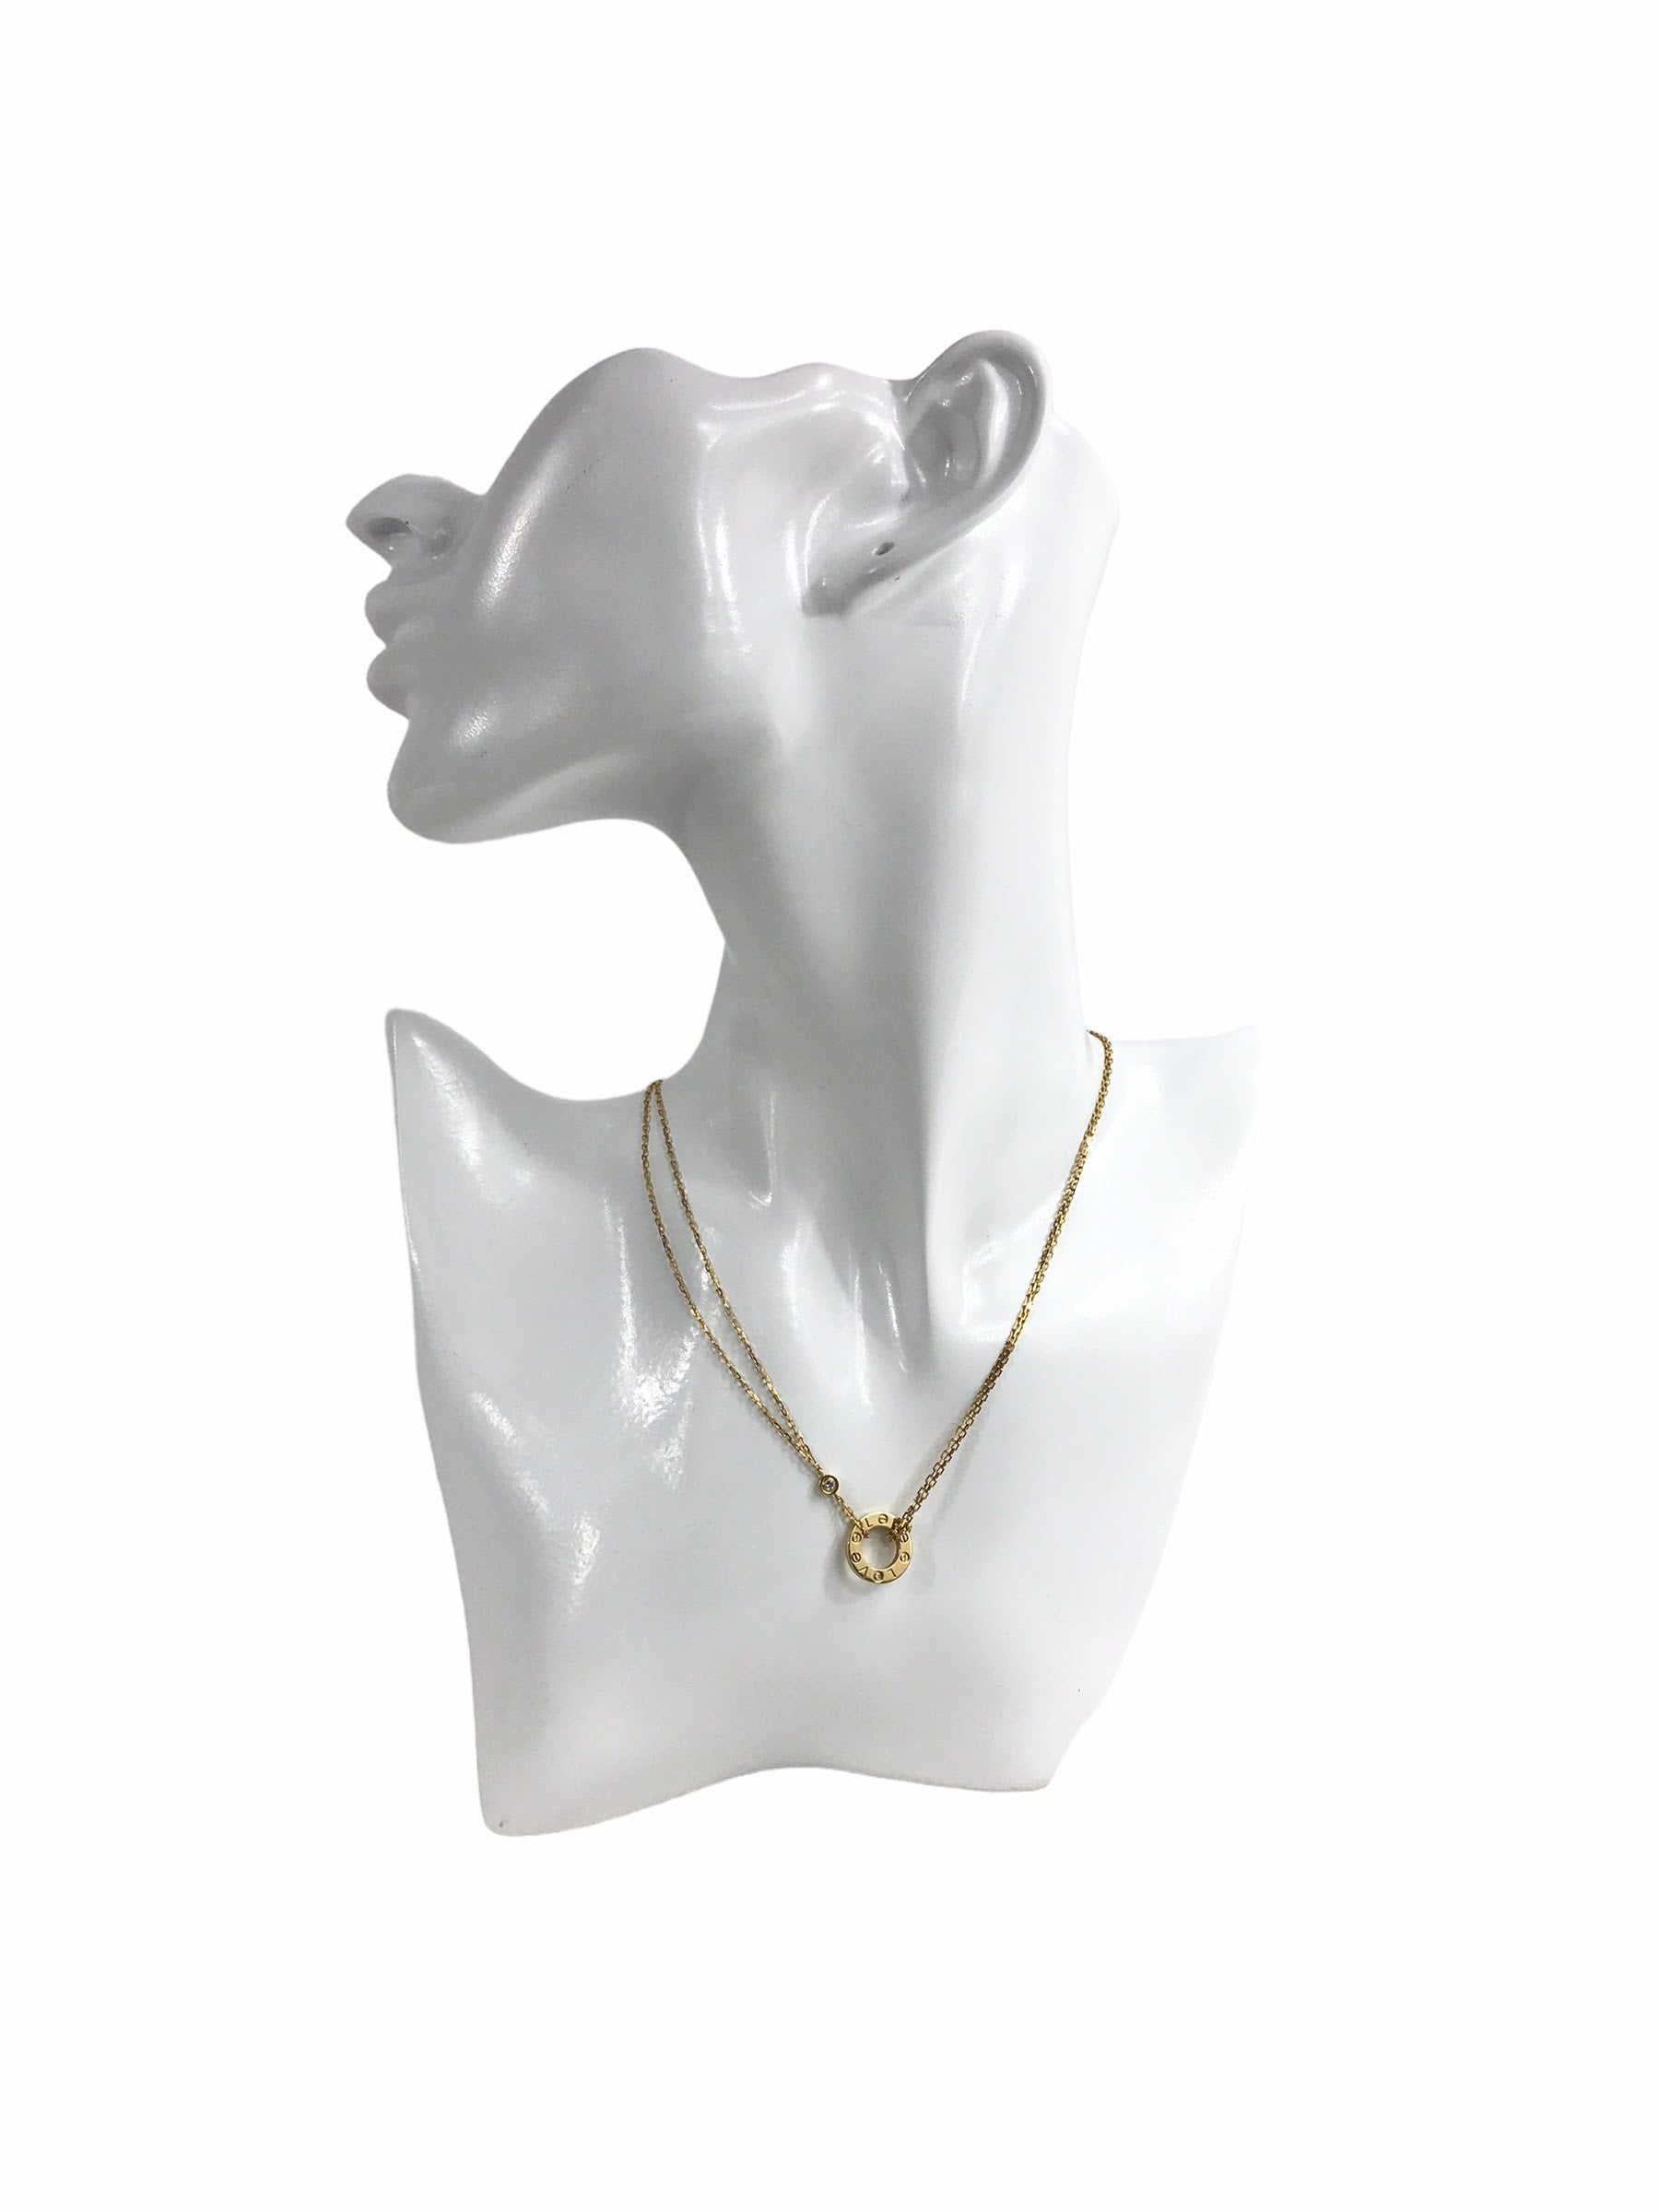 18K Yellow Gold Love Necklace